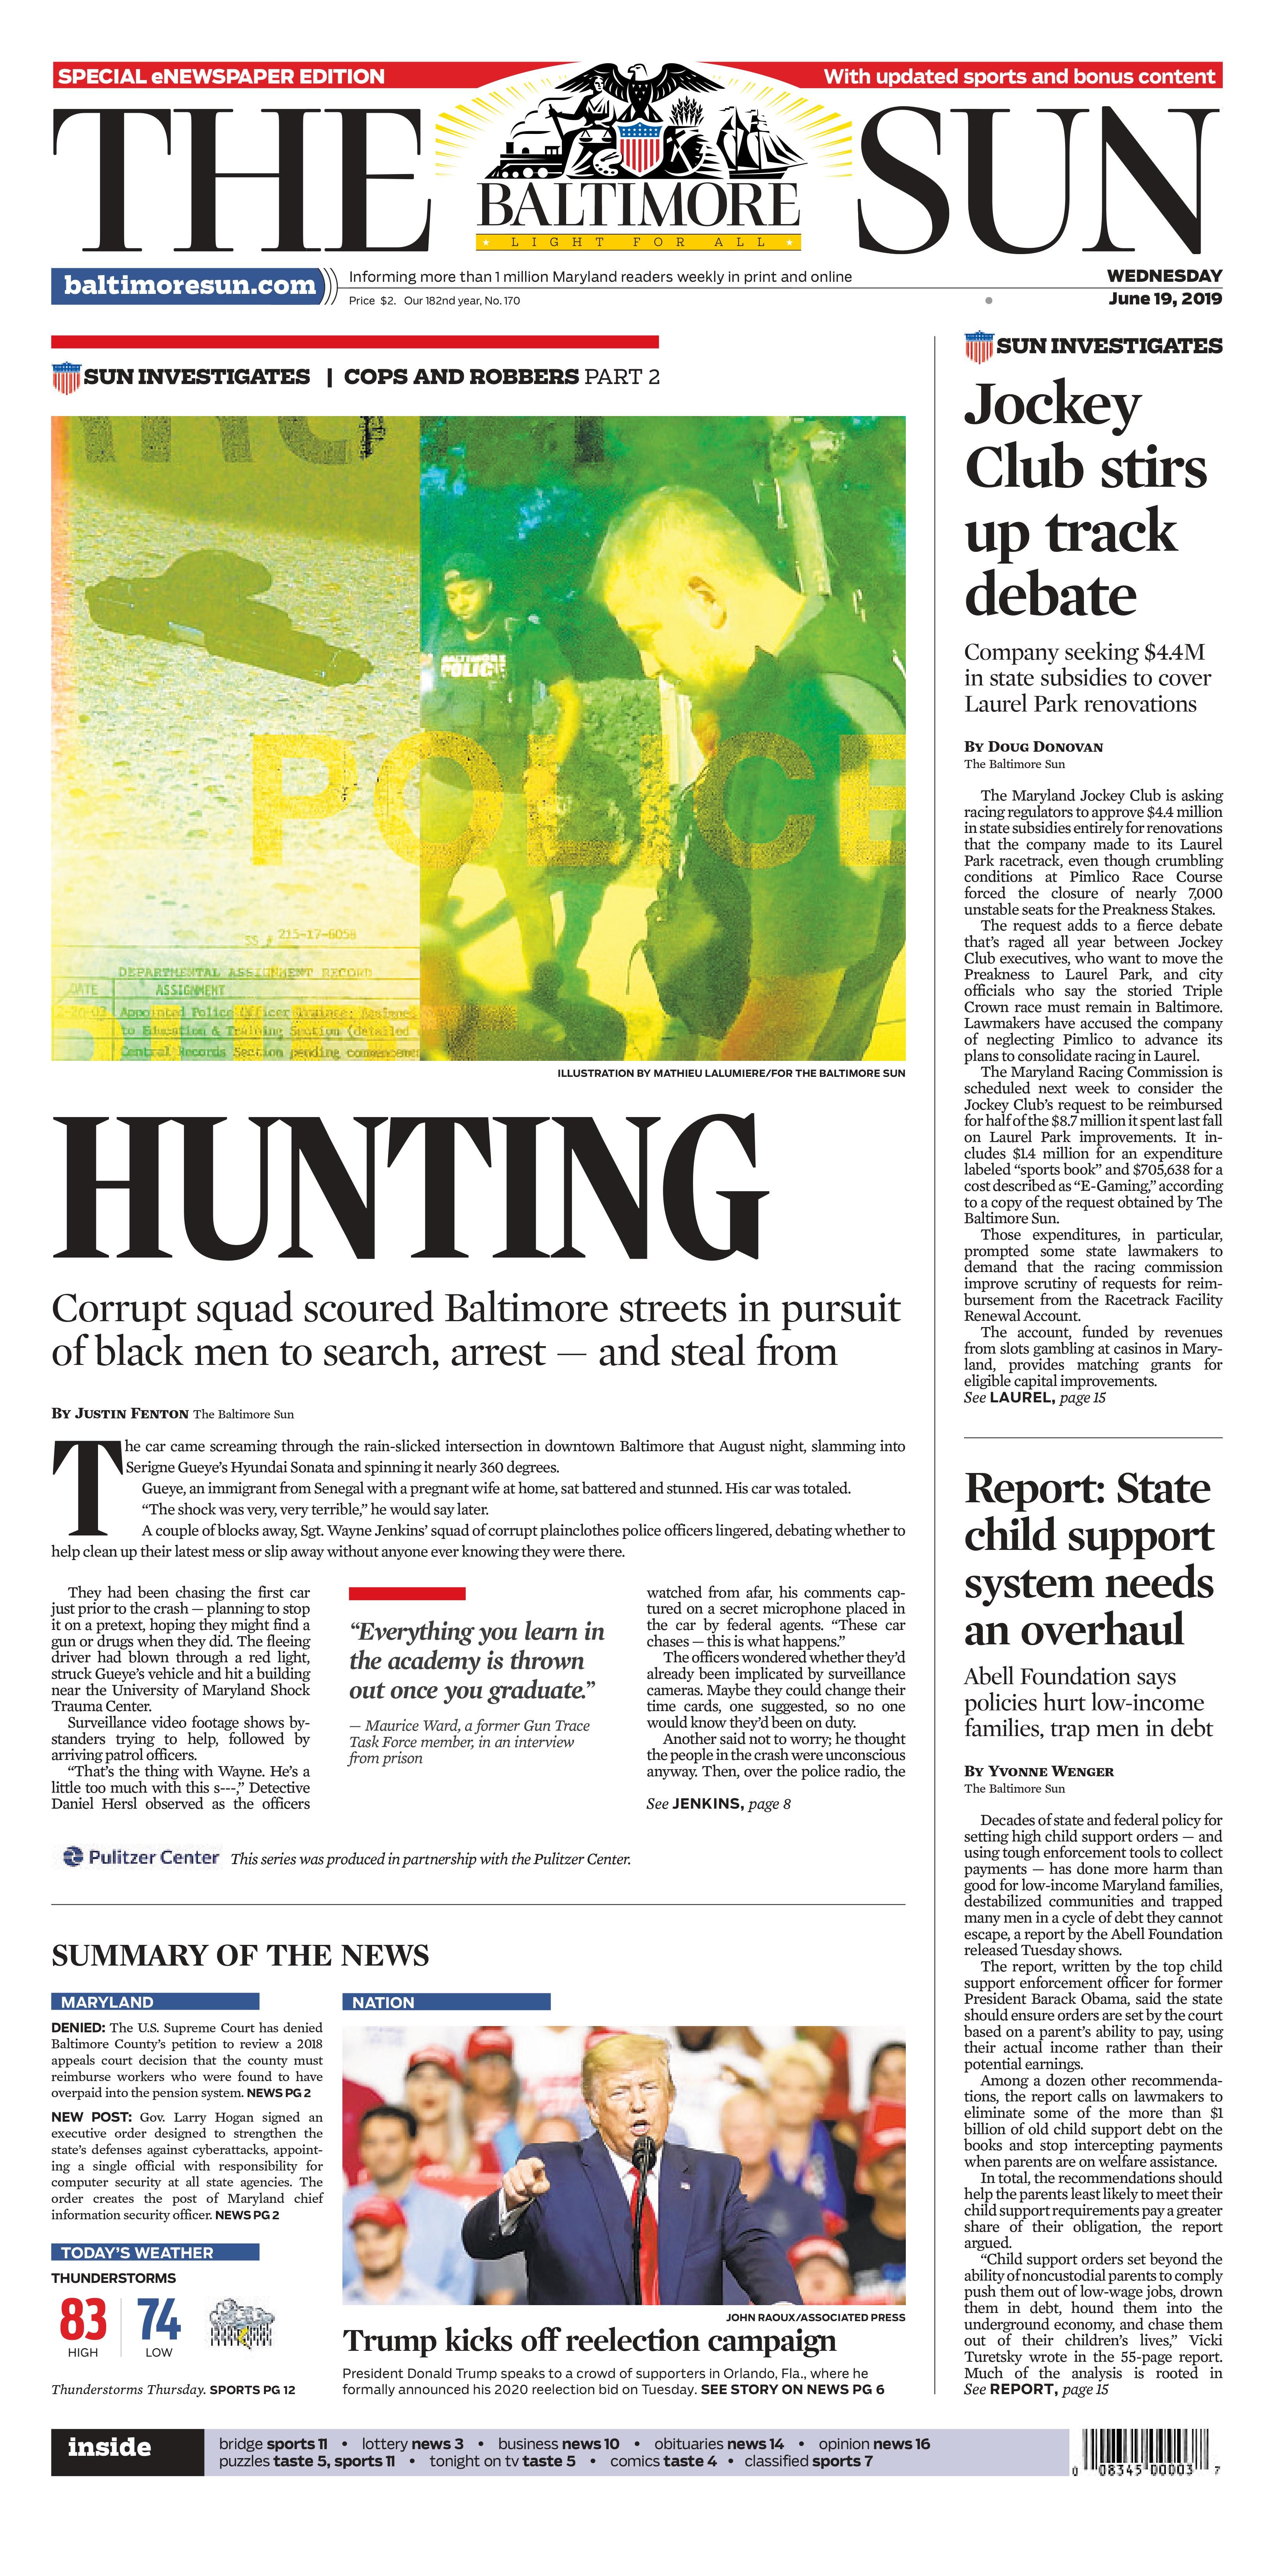 "Cops and Robbers" was featured on the front page of The Baltimore Sun. Image courtesy of the Baltimore Sun. United States, 2019. 